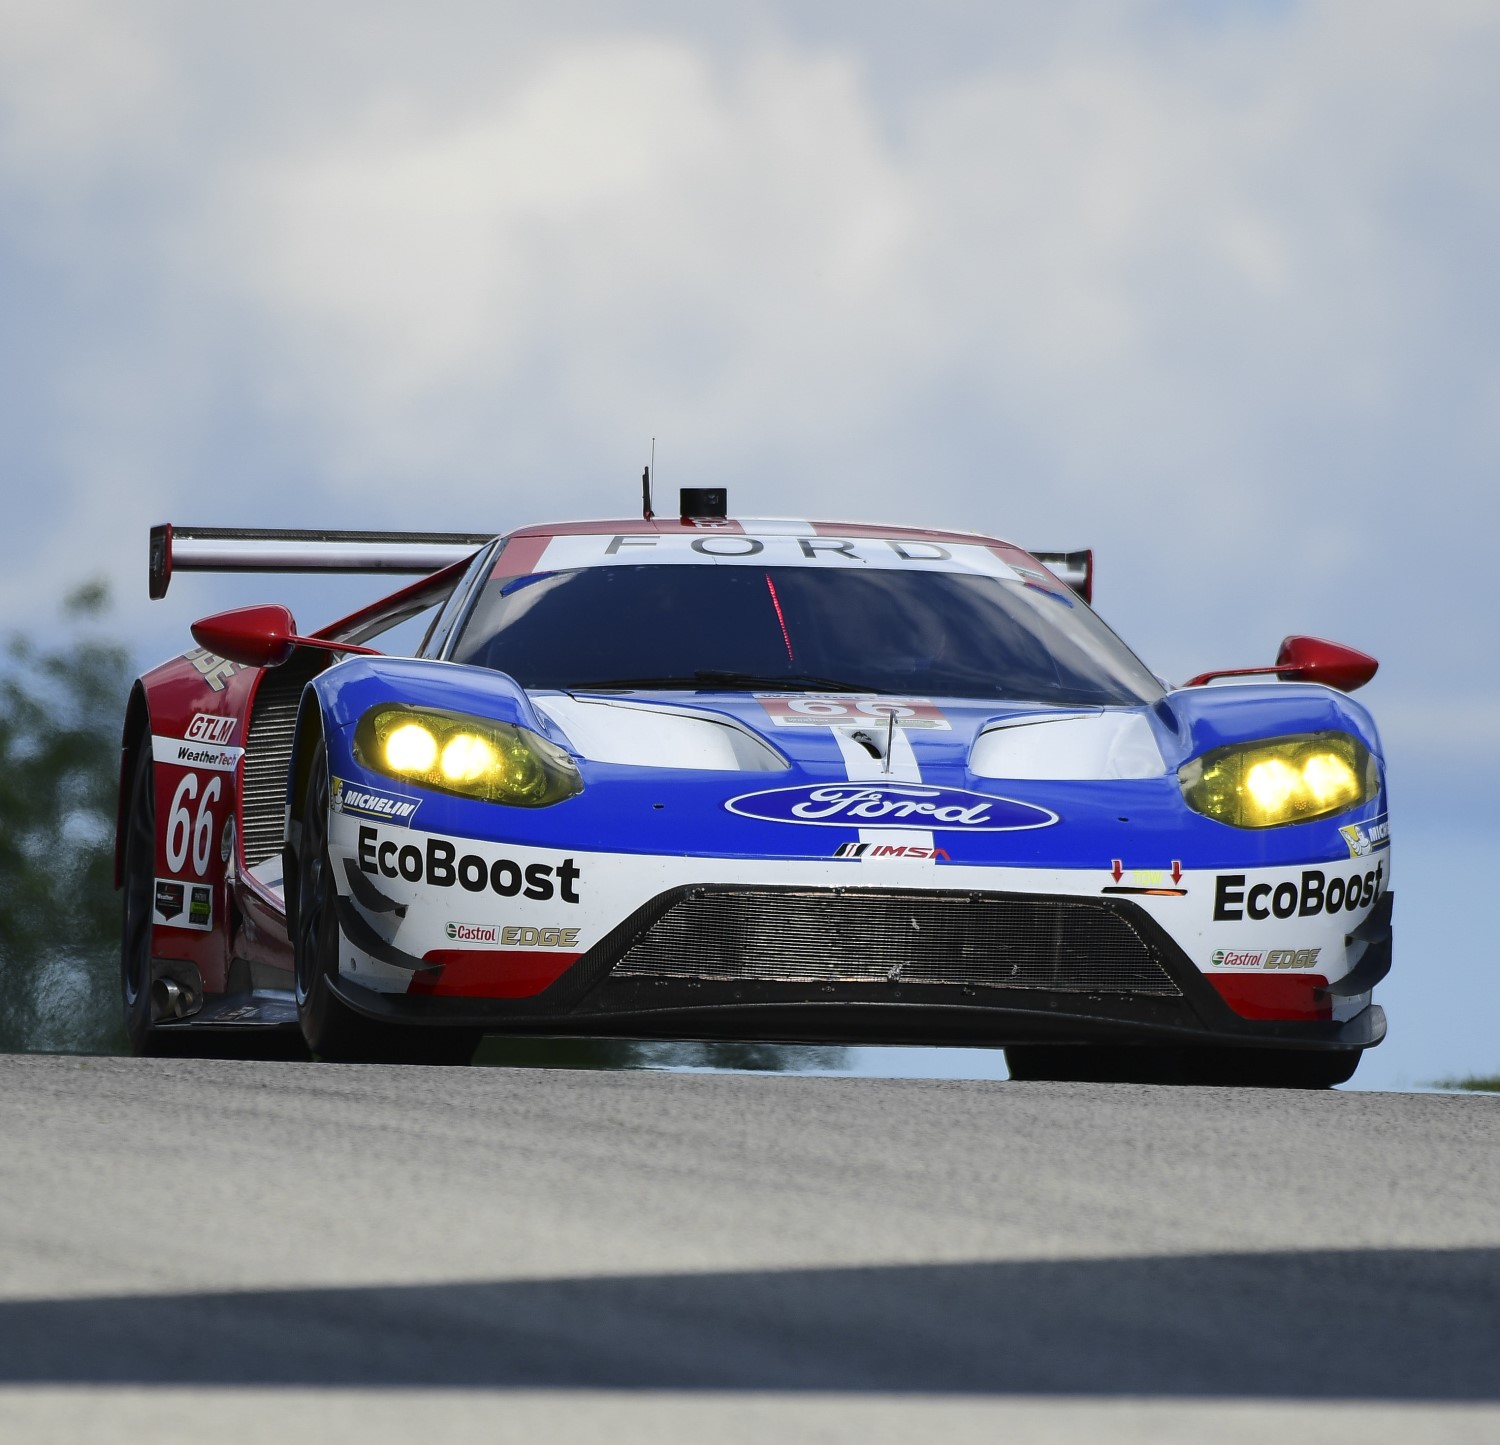 No. 66 Fort Gt on pole in GT class